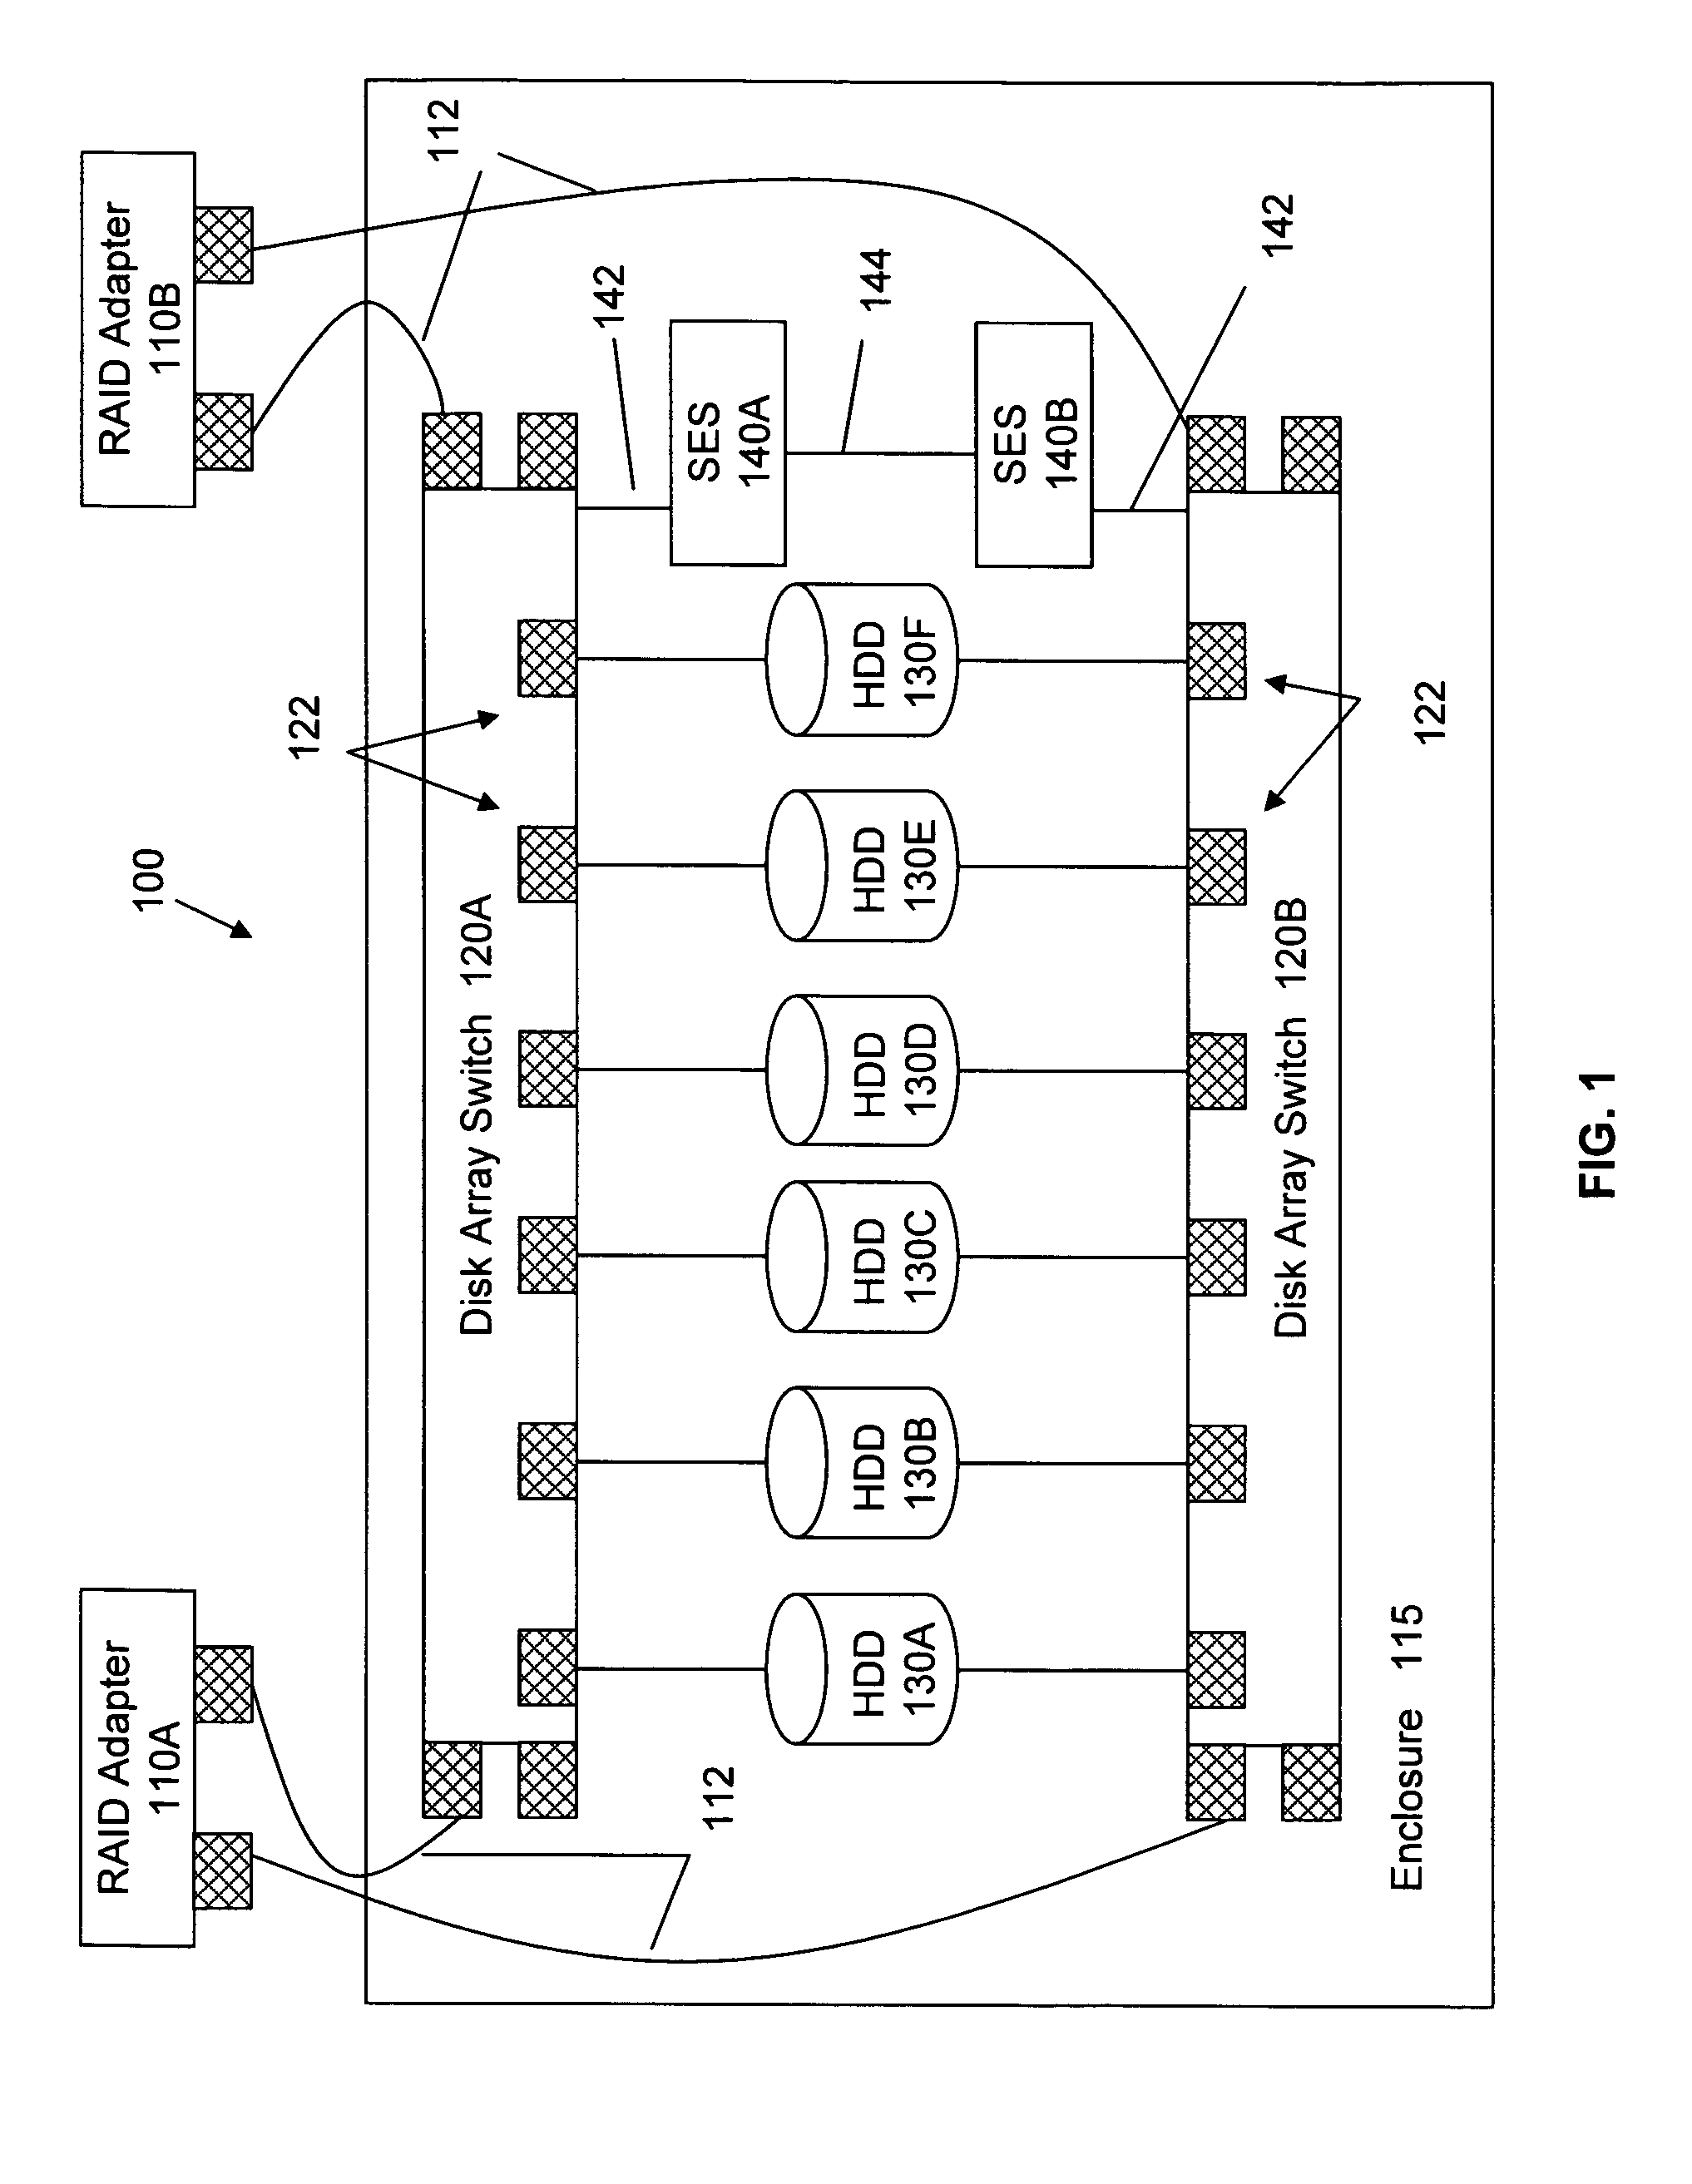 Offloading firmware update tasks from RAID adapter to distributed service processors in switched drive connection network enclosure